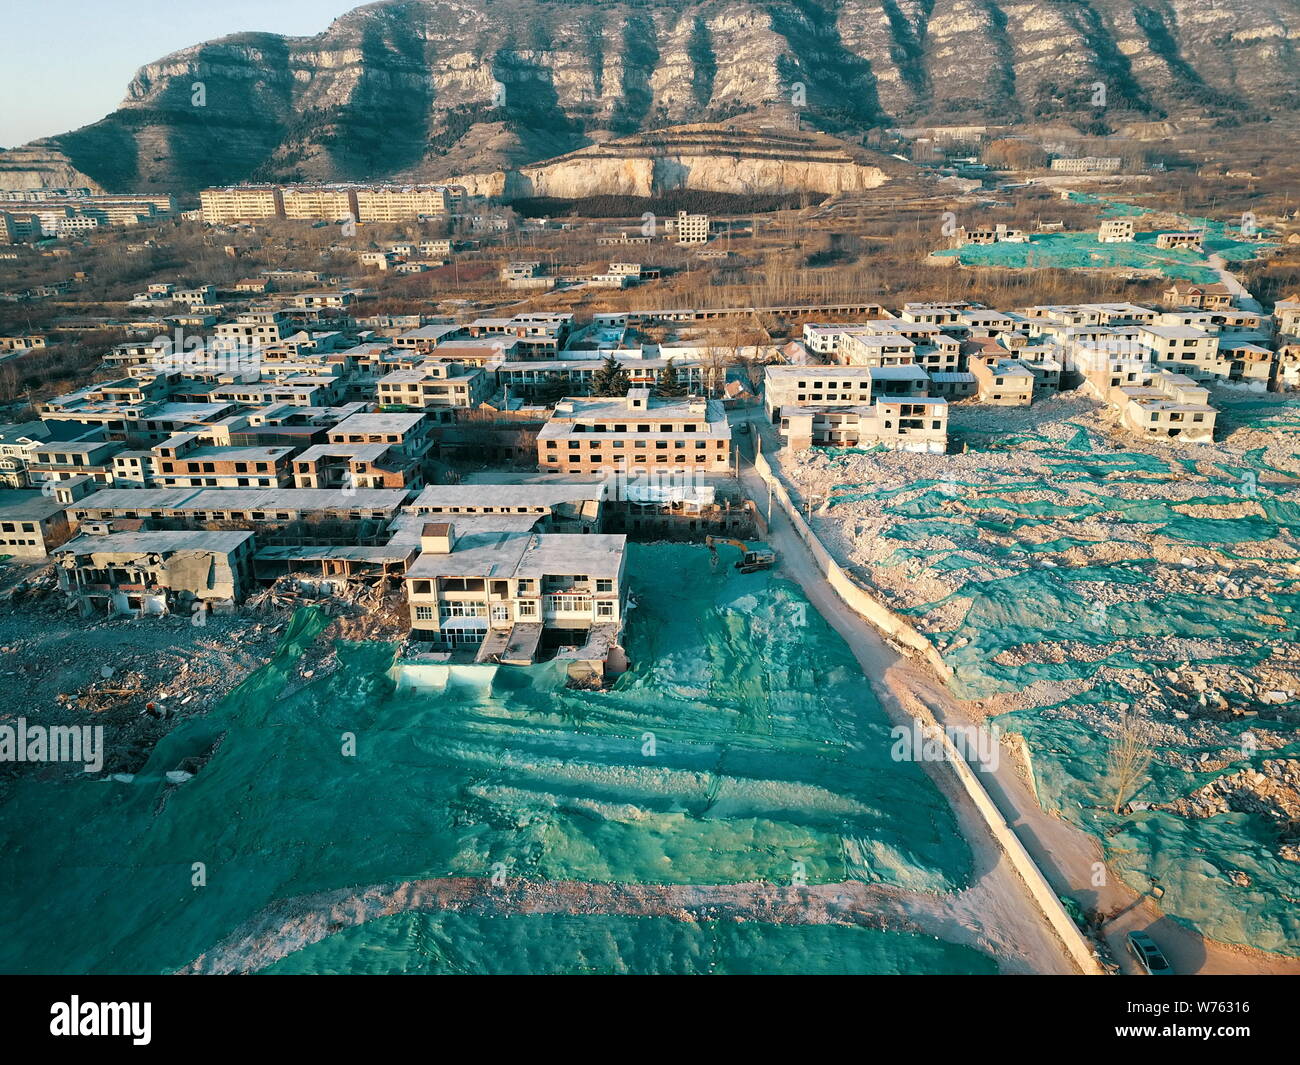 Aerial view of a 700-year-old village, Dajiangou village, almost razed to the ground due to renovation project of local government in Ji'nan city, eas Stock Photo